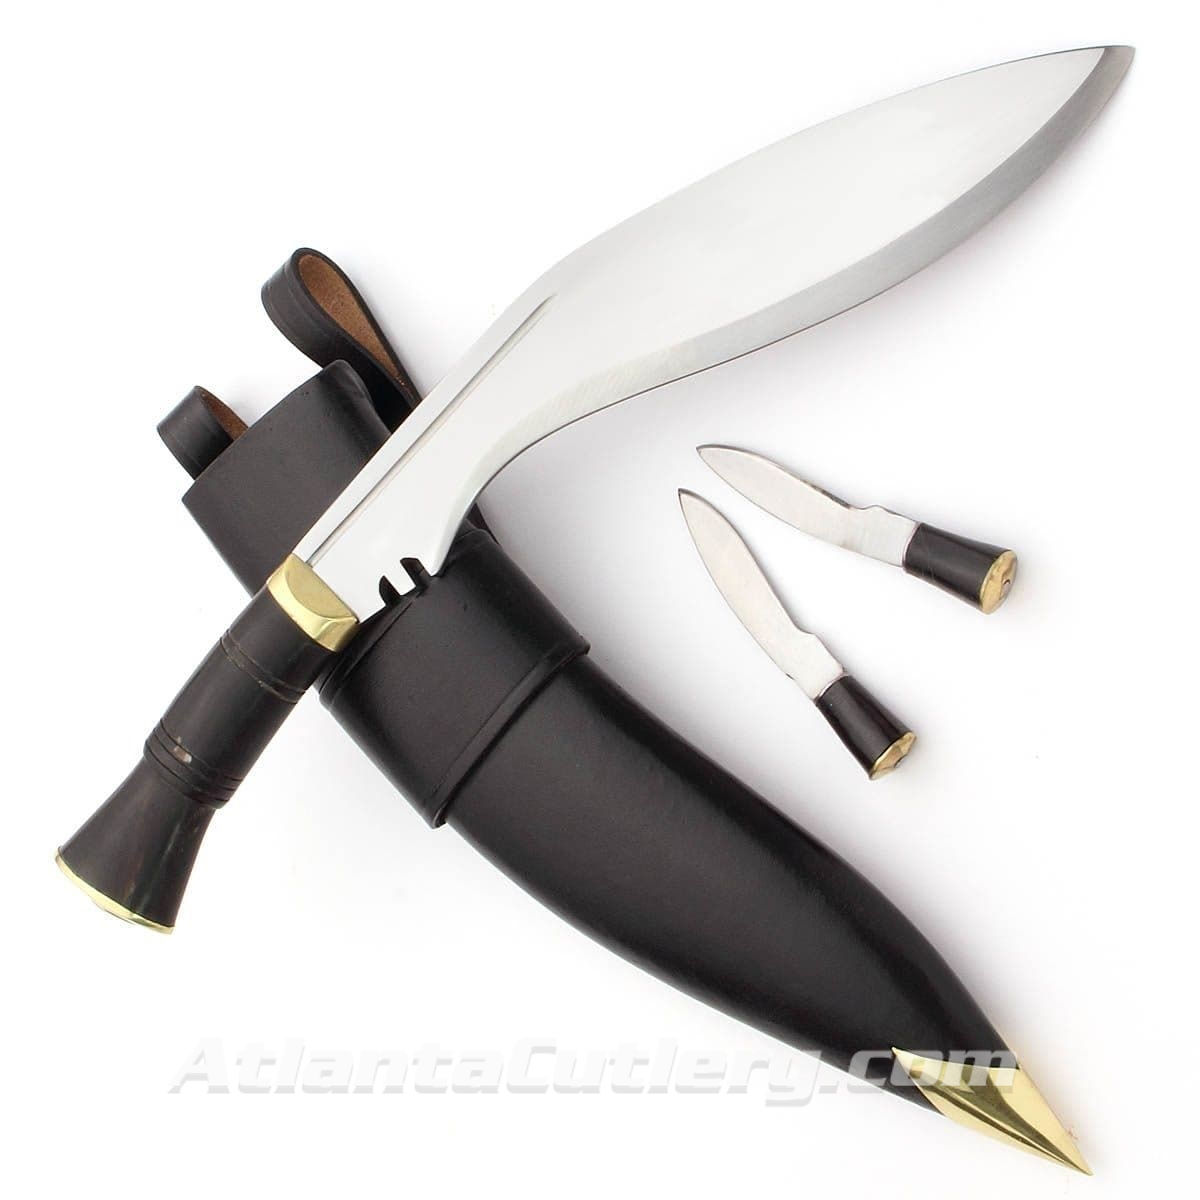 Officer's Kukri with sheath and small knives